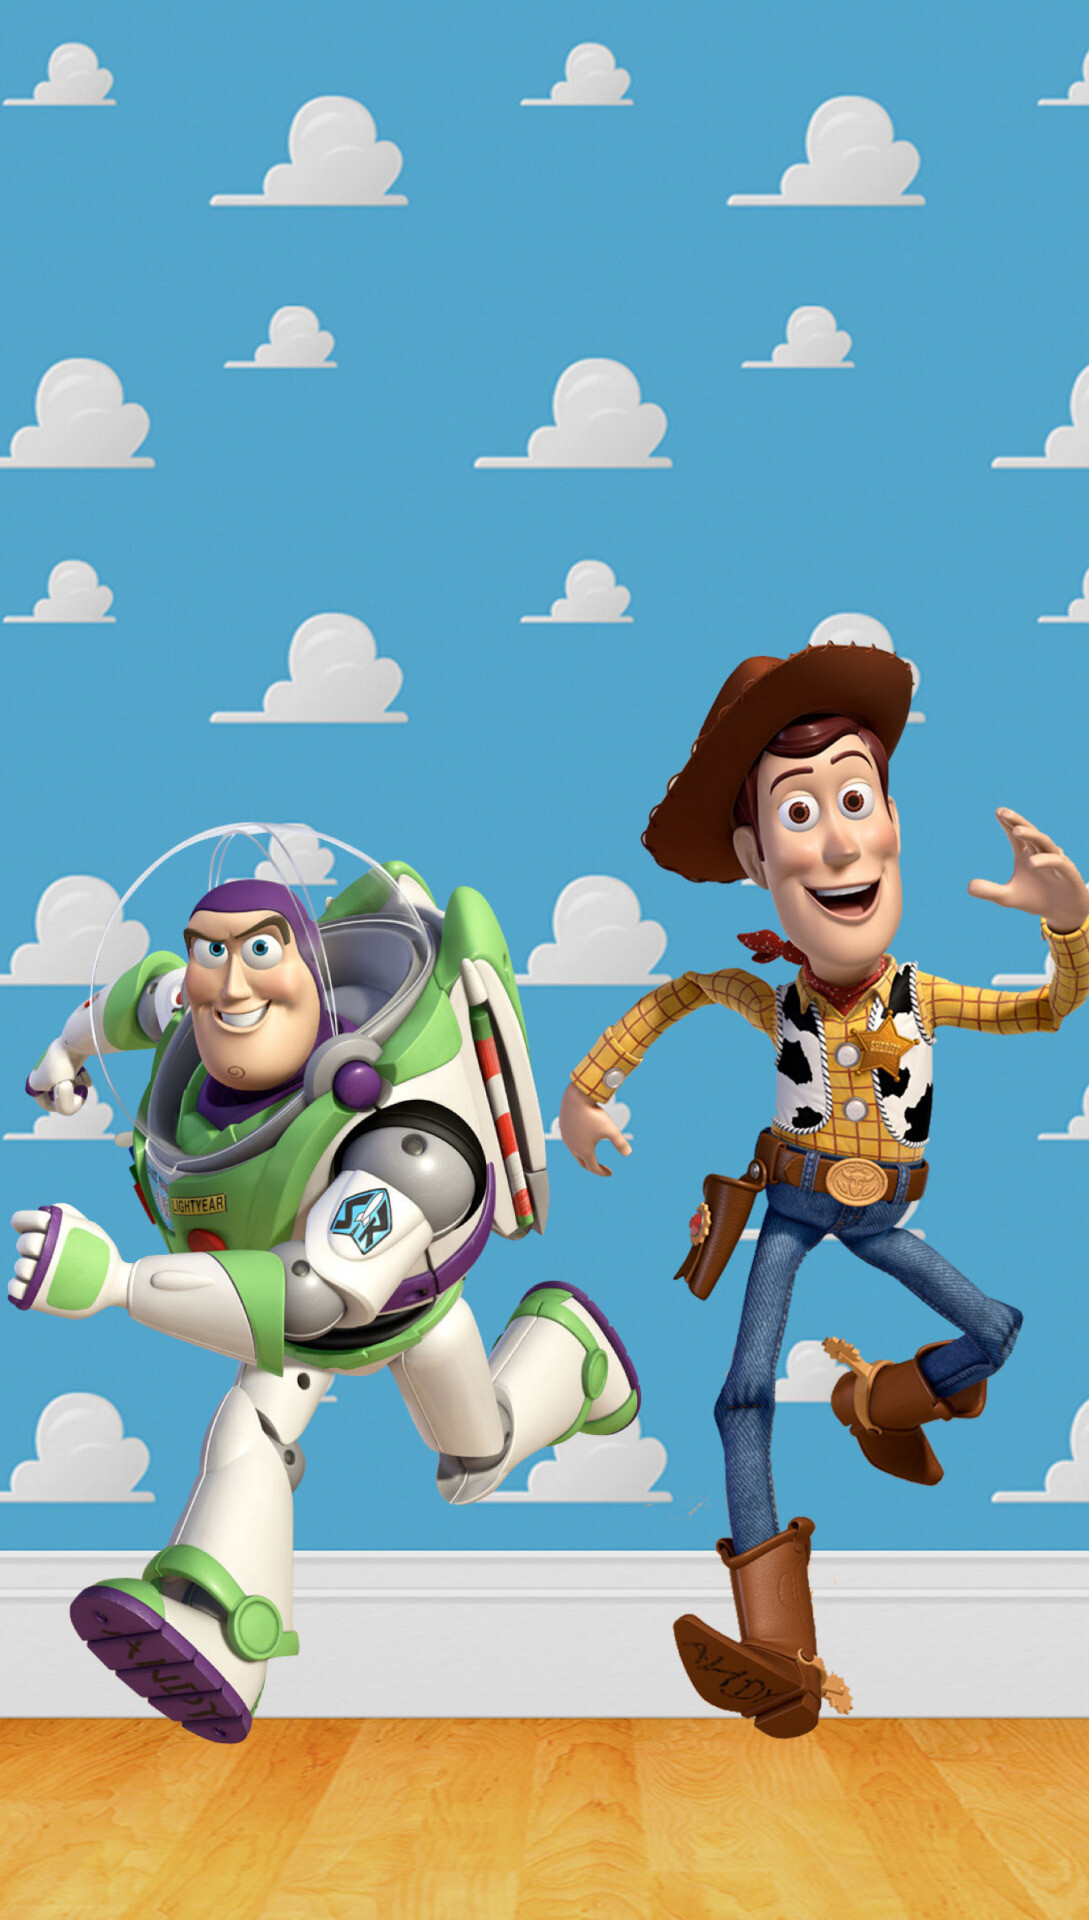 Toy Story: Woody and Buzz, a classic cowboy doll and a modern spaceman action figure. 1090x1920 HD Background.